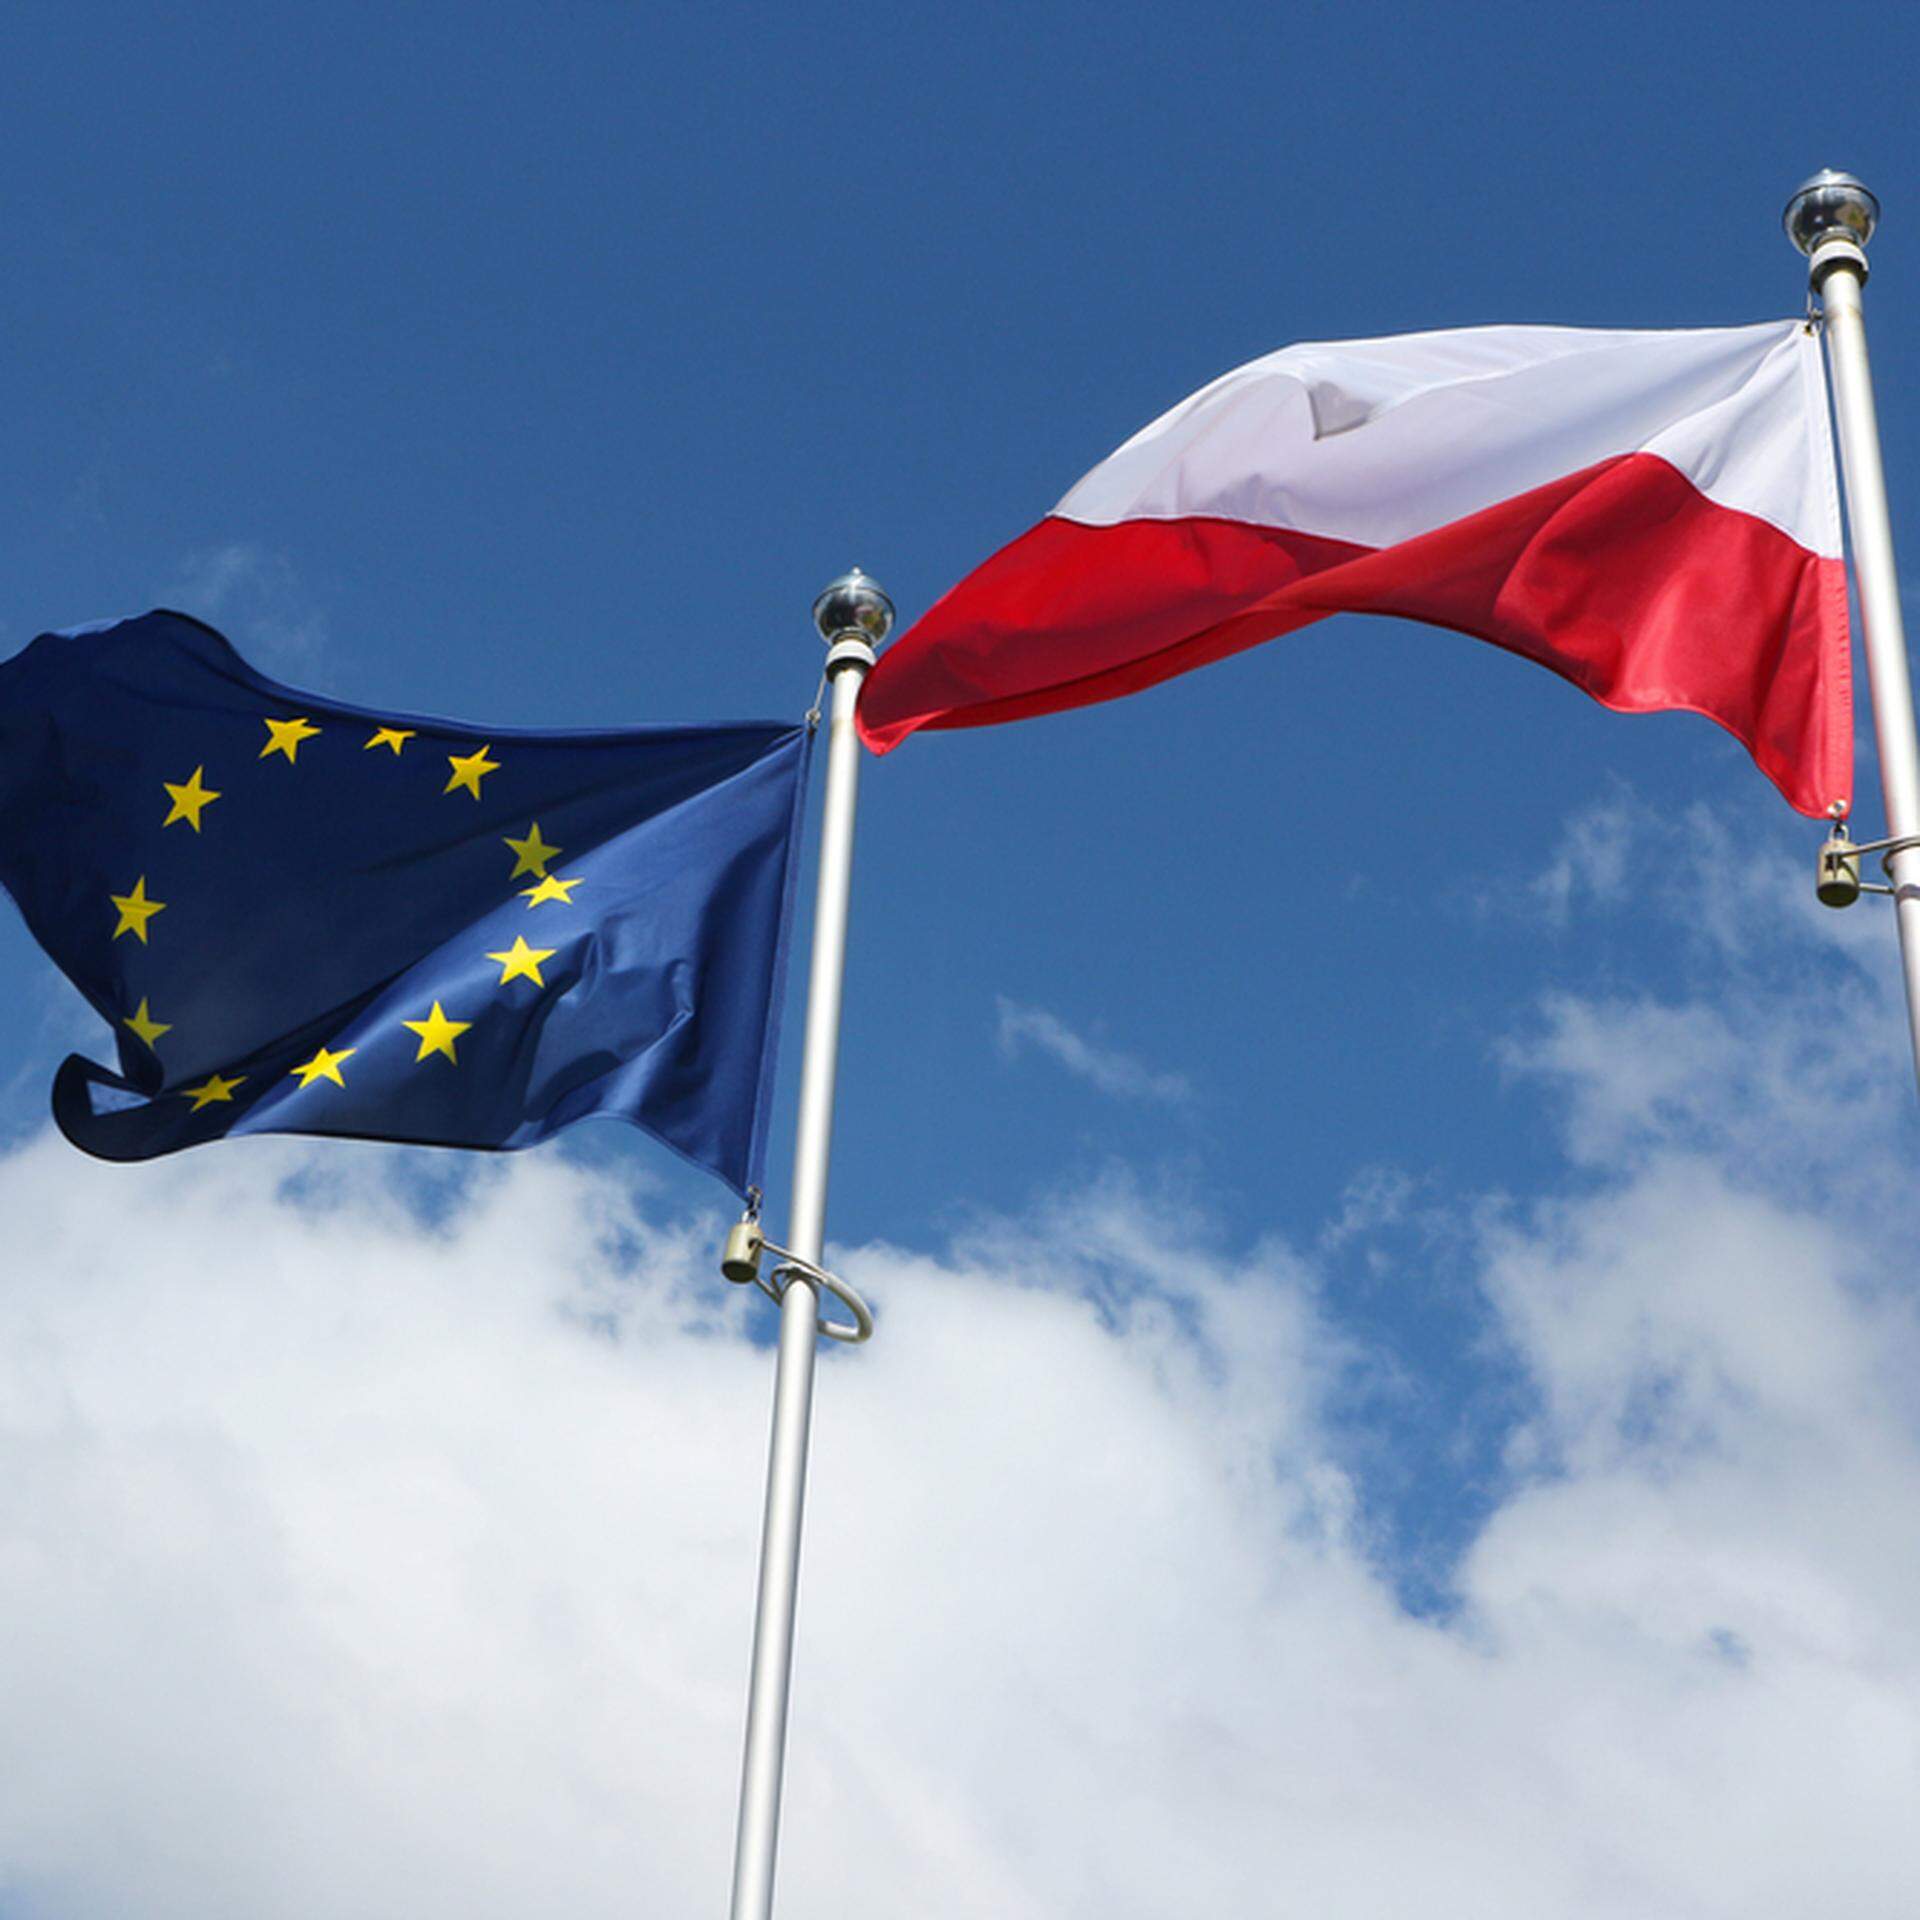 Poland flag and European Union flag on a background of blue sky with clouds